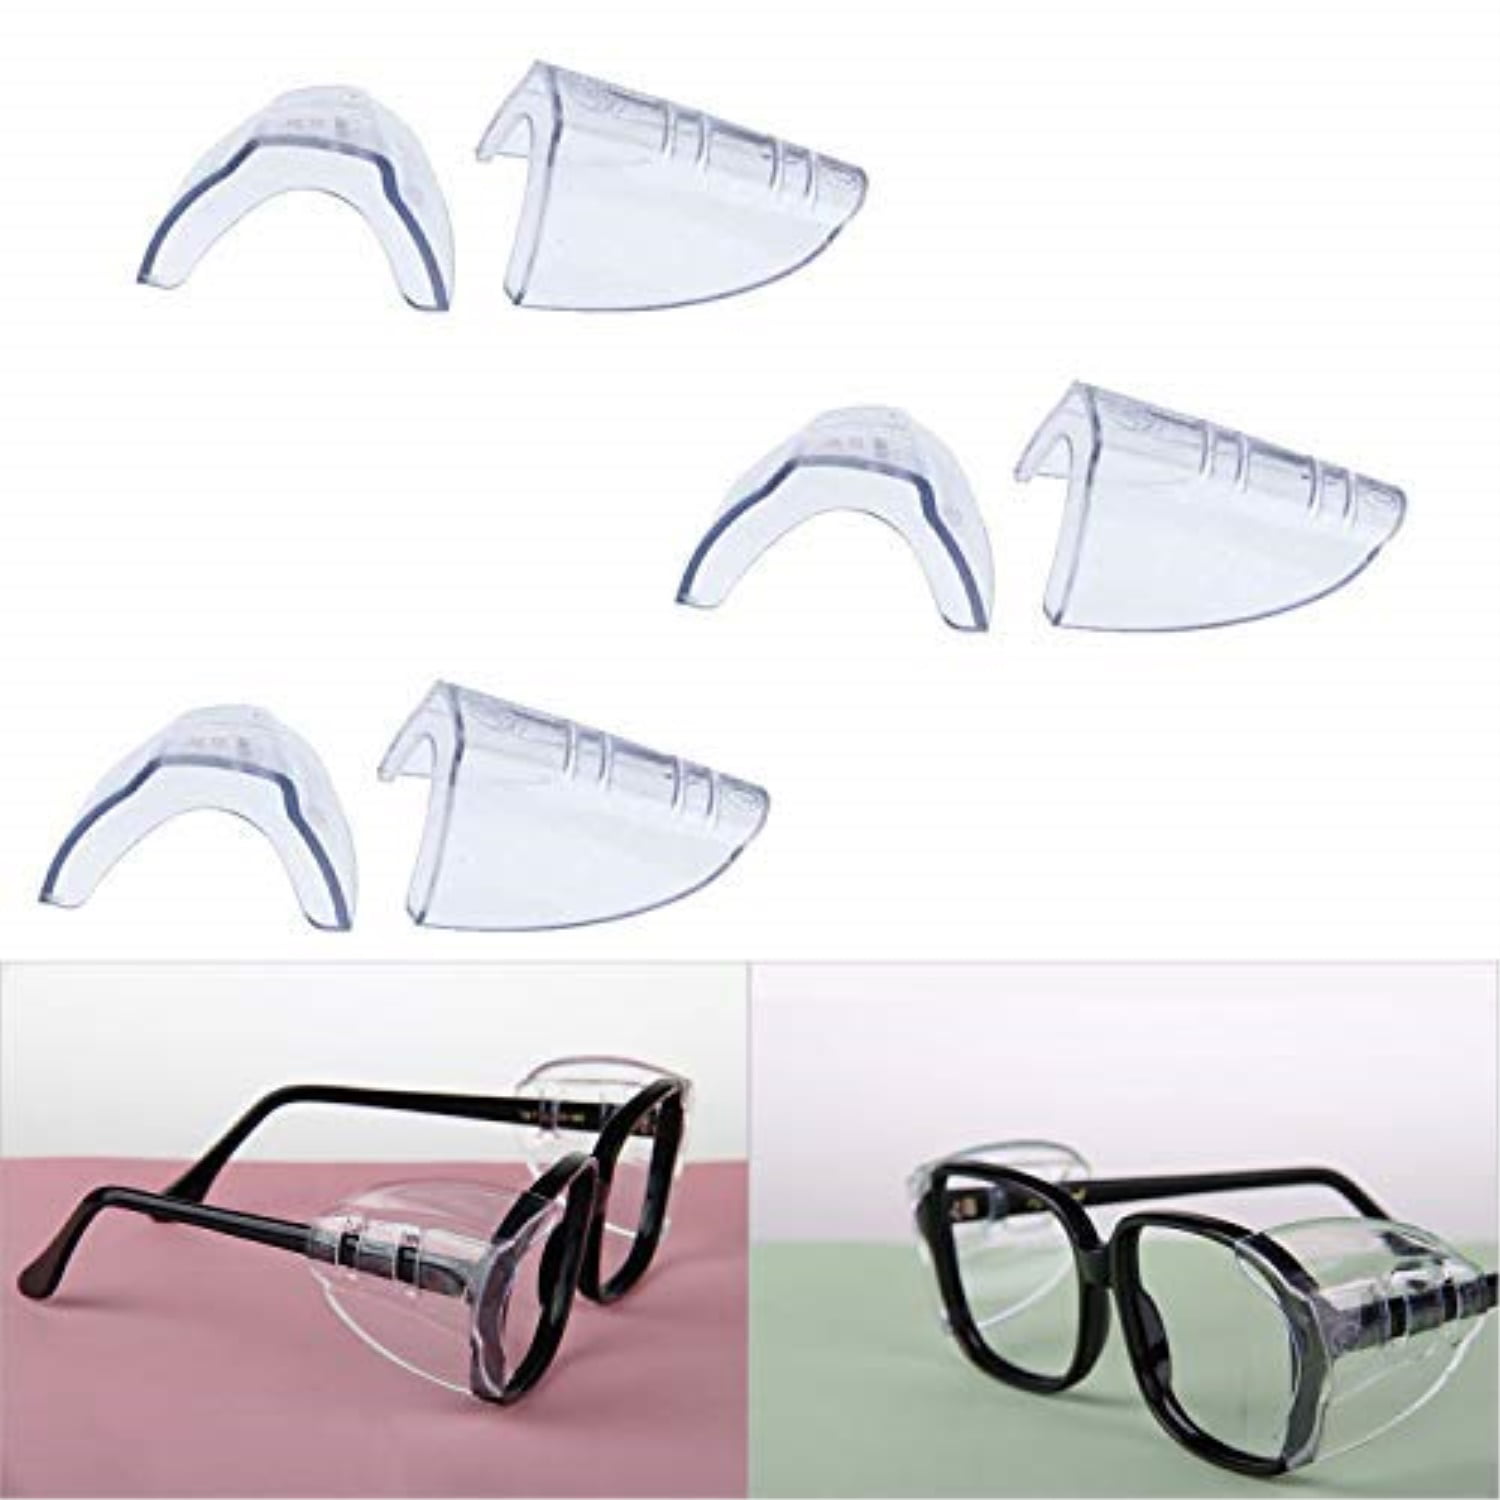 Hubs Gadget 3 Pairs Safety Eye Glasses Side Shields Slip On Clear Side Shield For Safety 